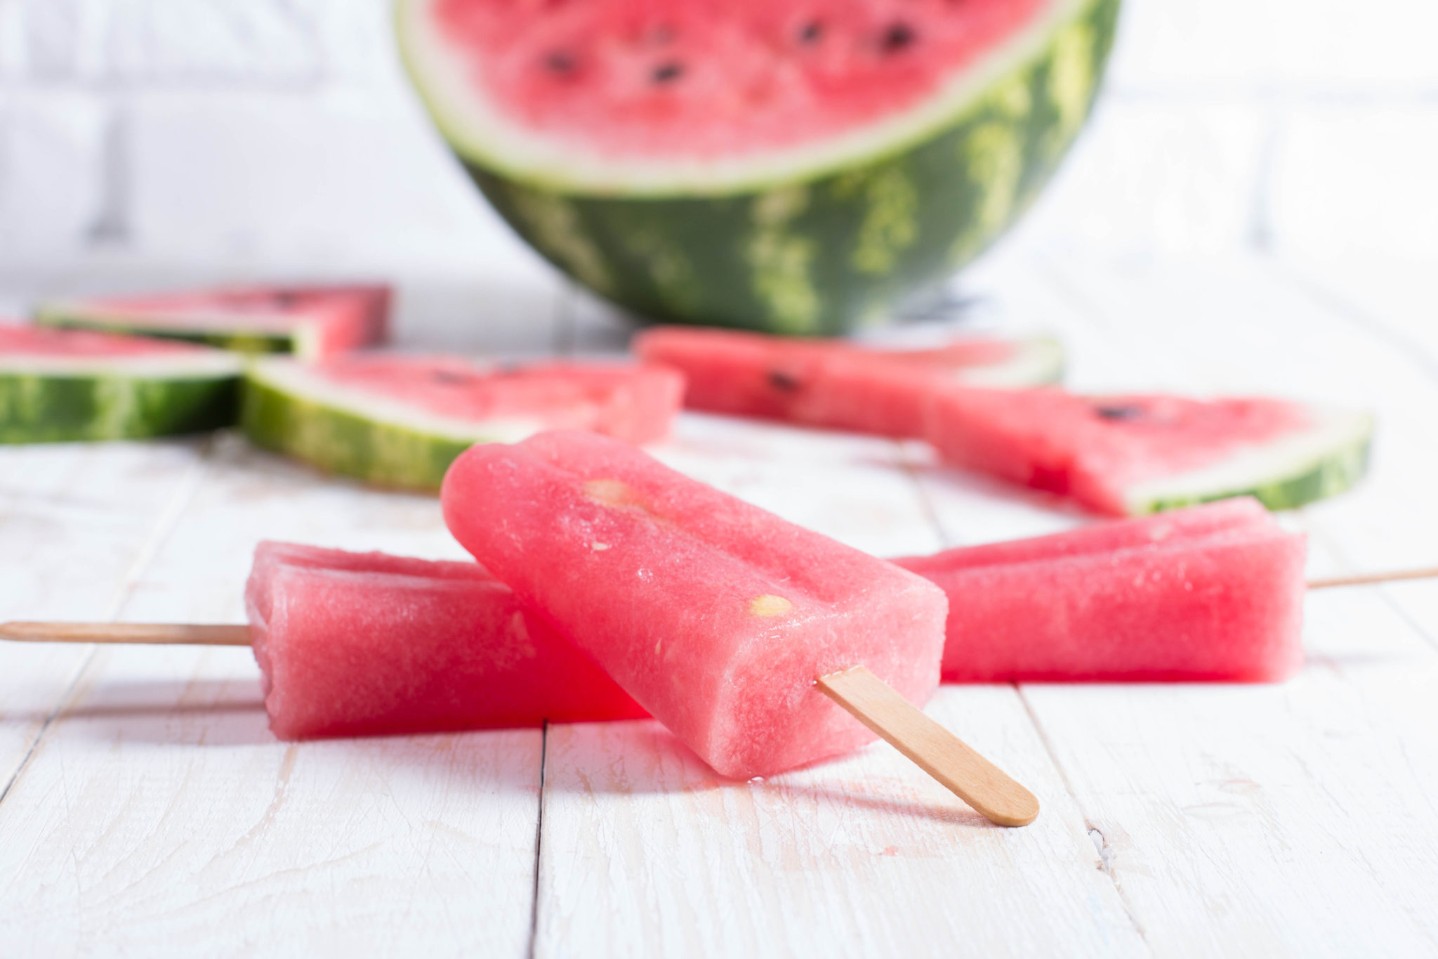 Ice pop of watermelon on a white board. Slices of red watermelon